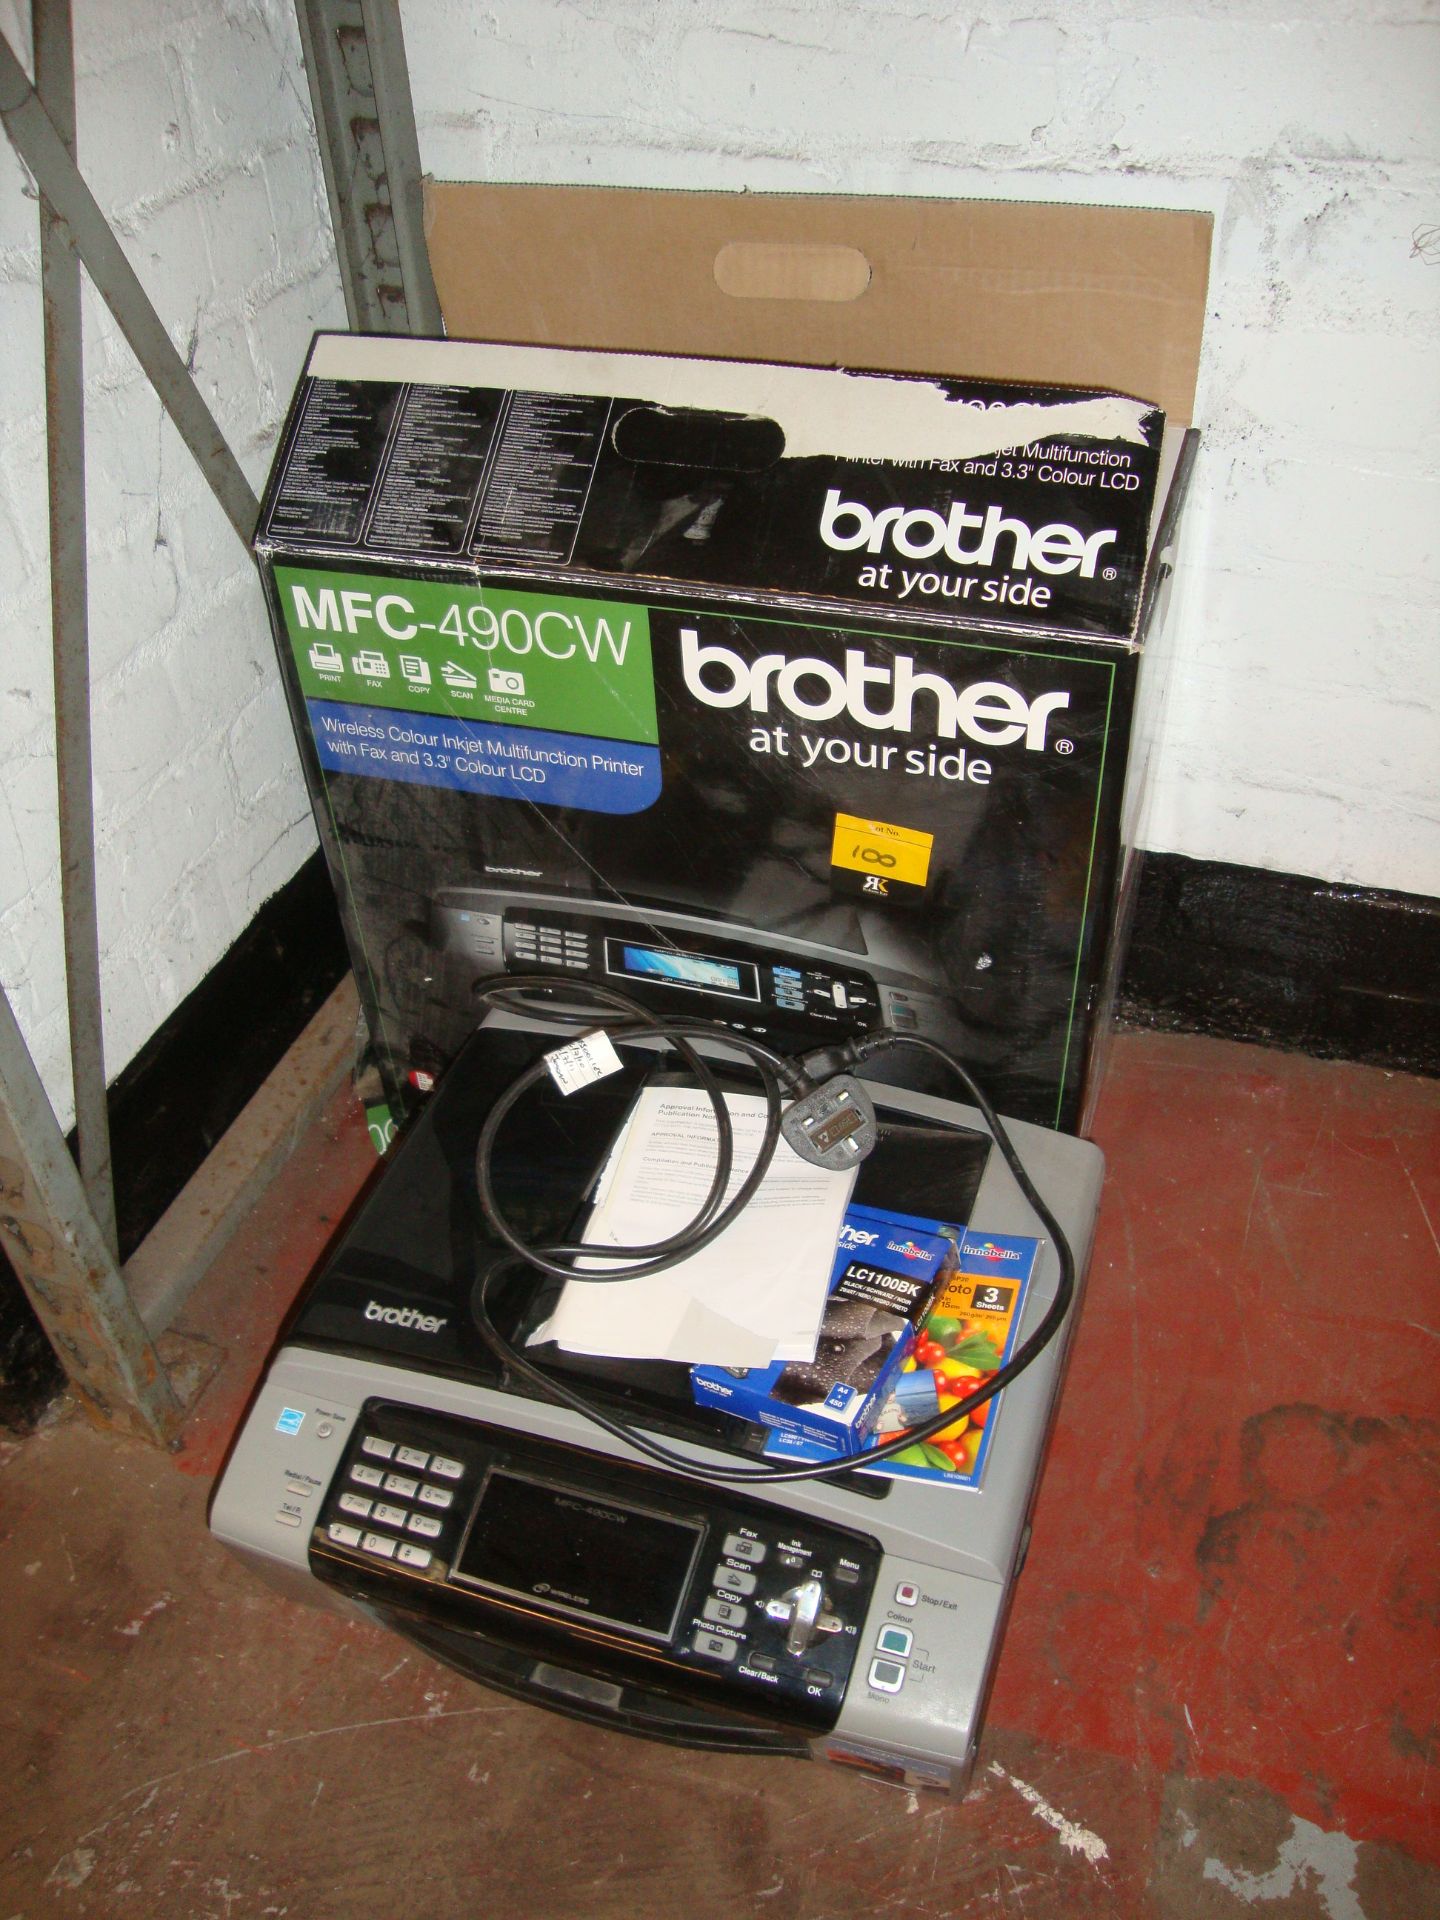 Brother model MFC-490CW wireless colour inkjet multifunction printer with fax and 3.3" colour LCD - Image 3 of 3